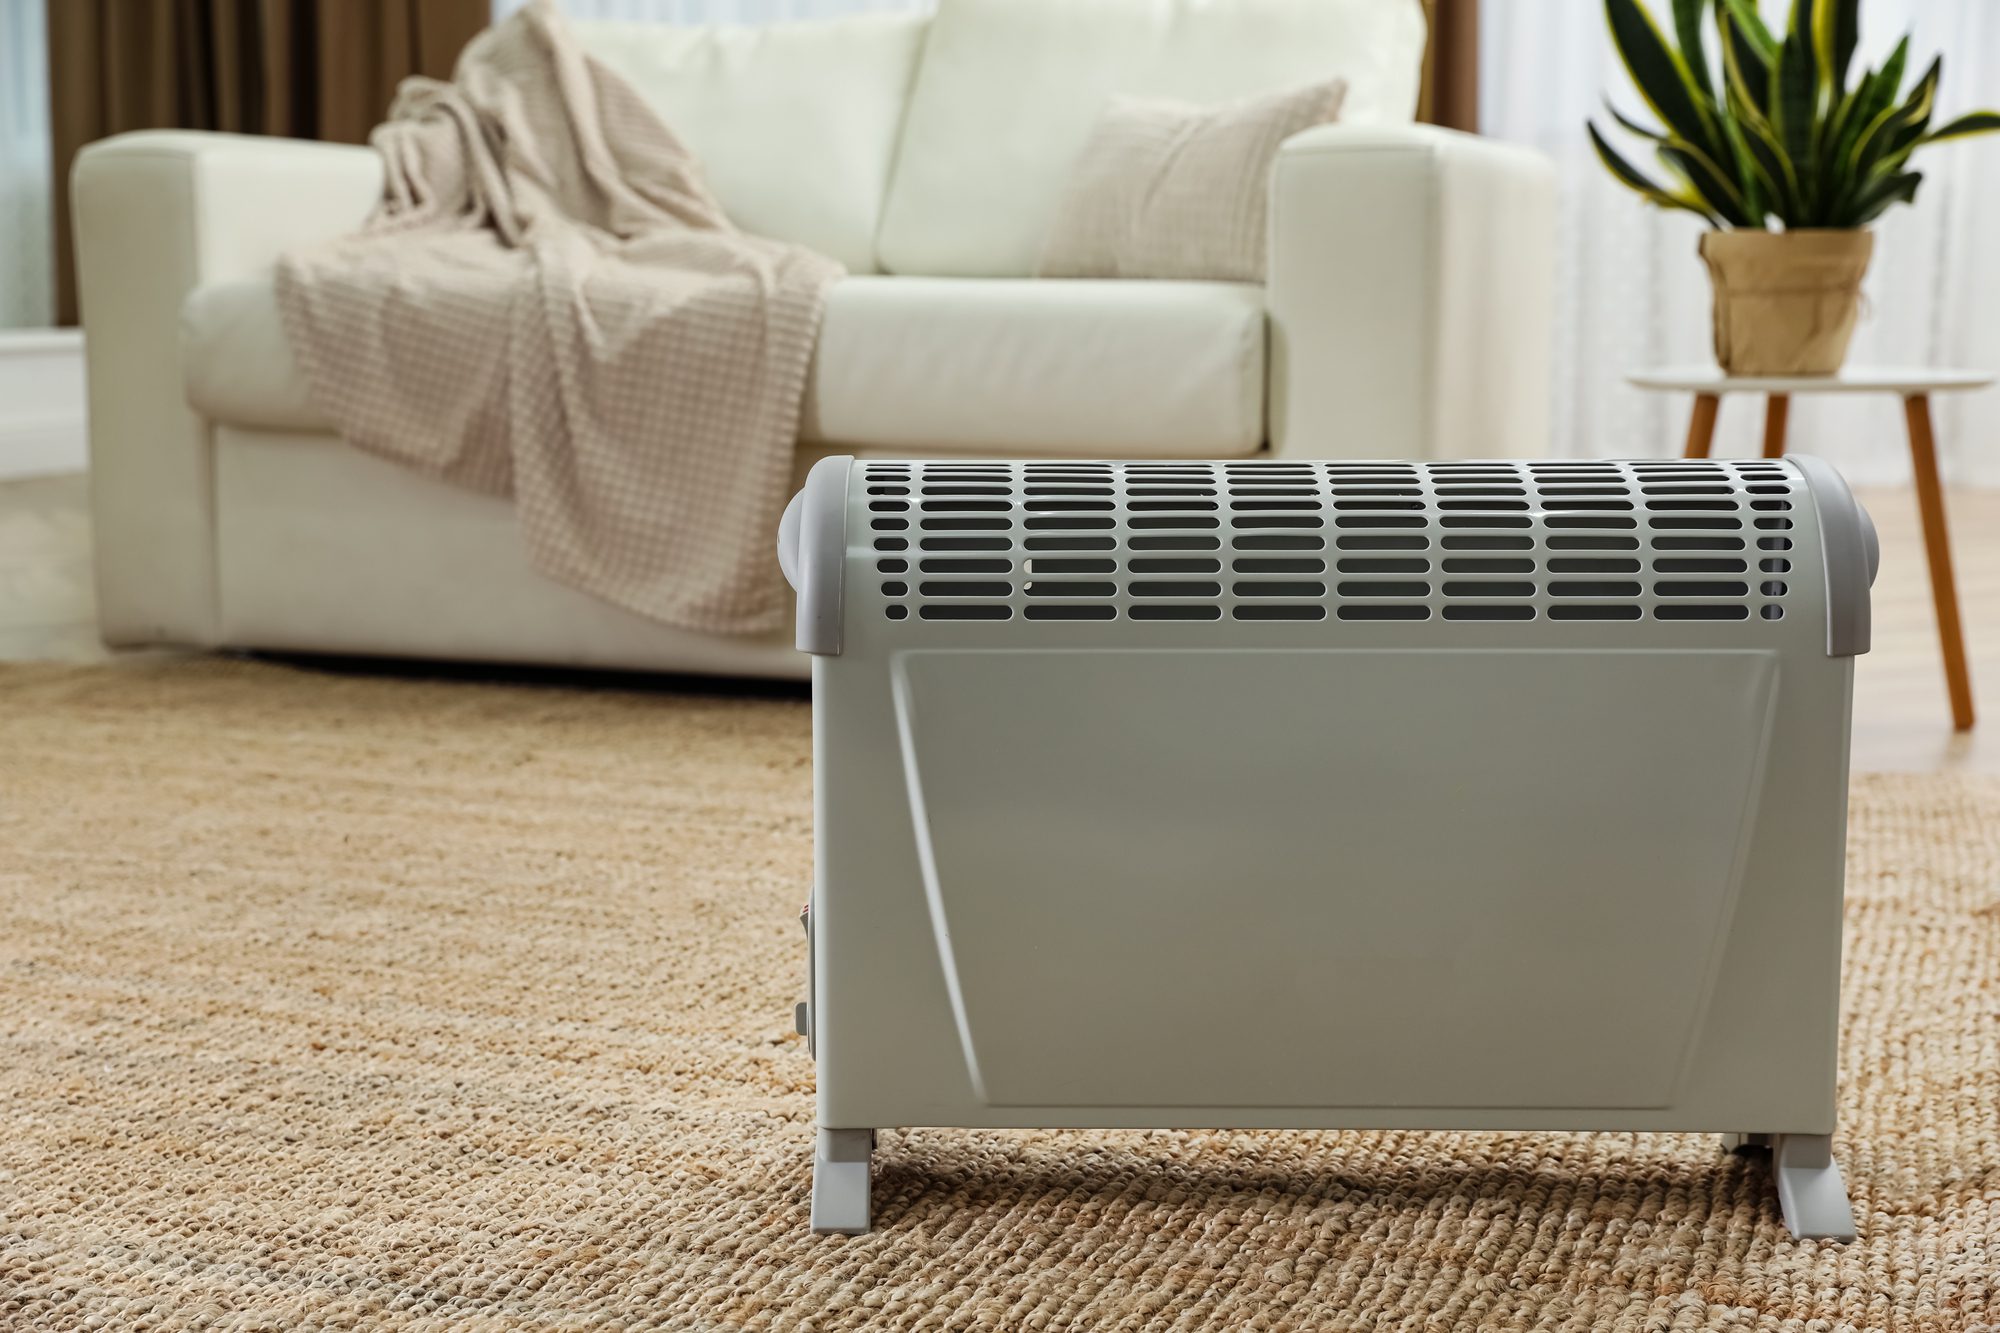 How to Know the Heater Wattage: A Guide for Homeowners